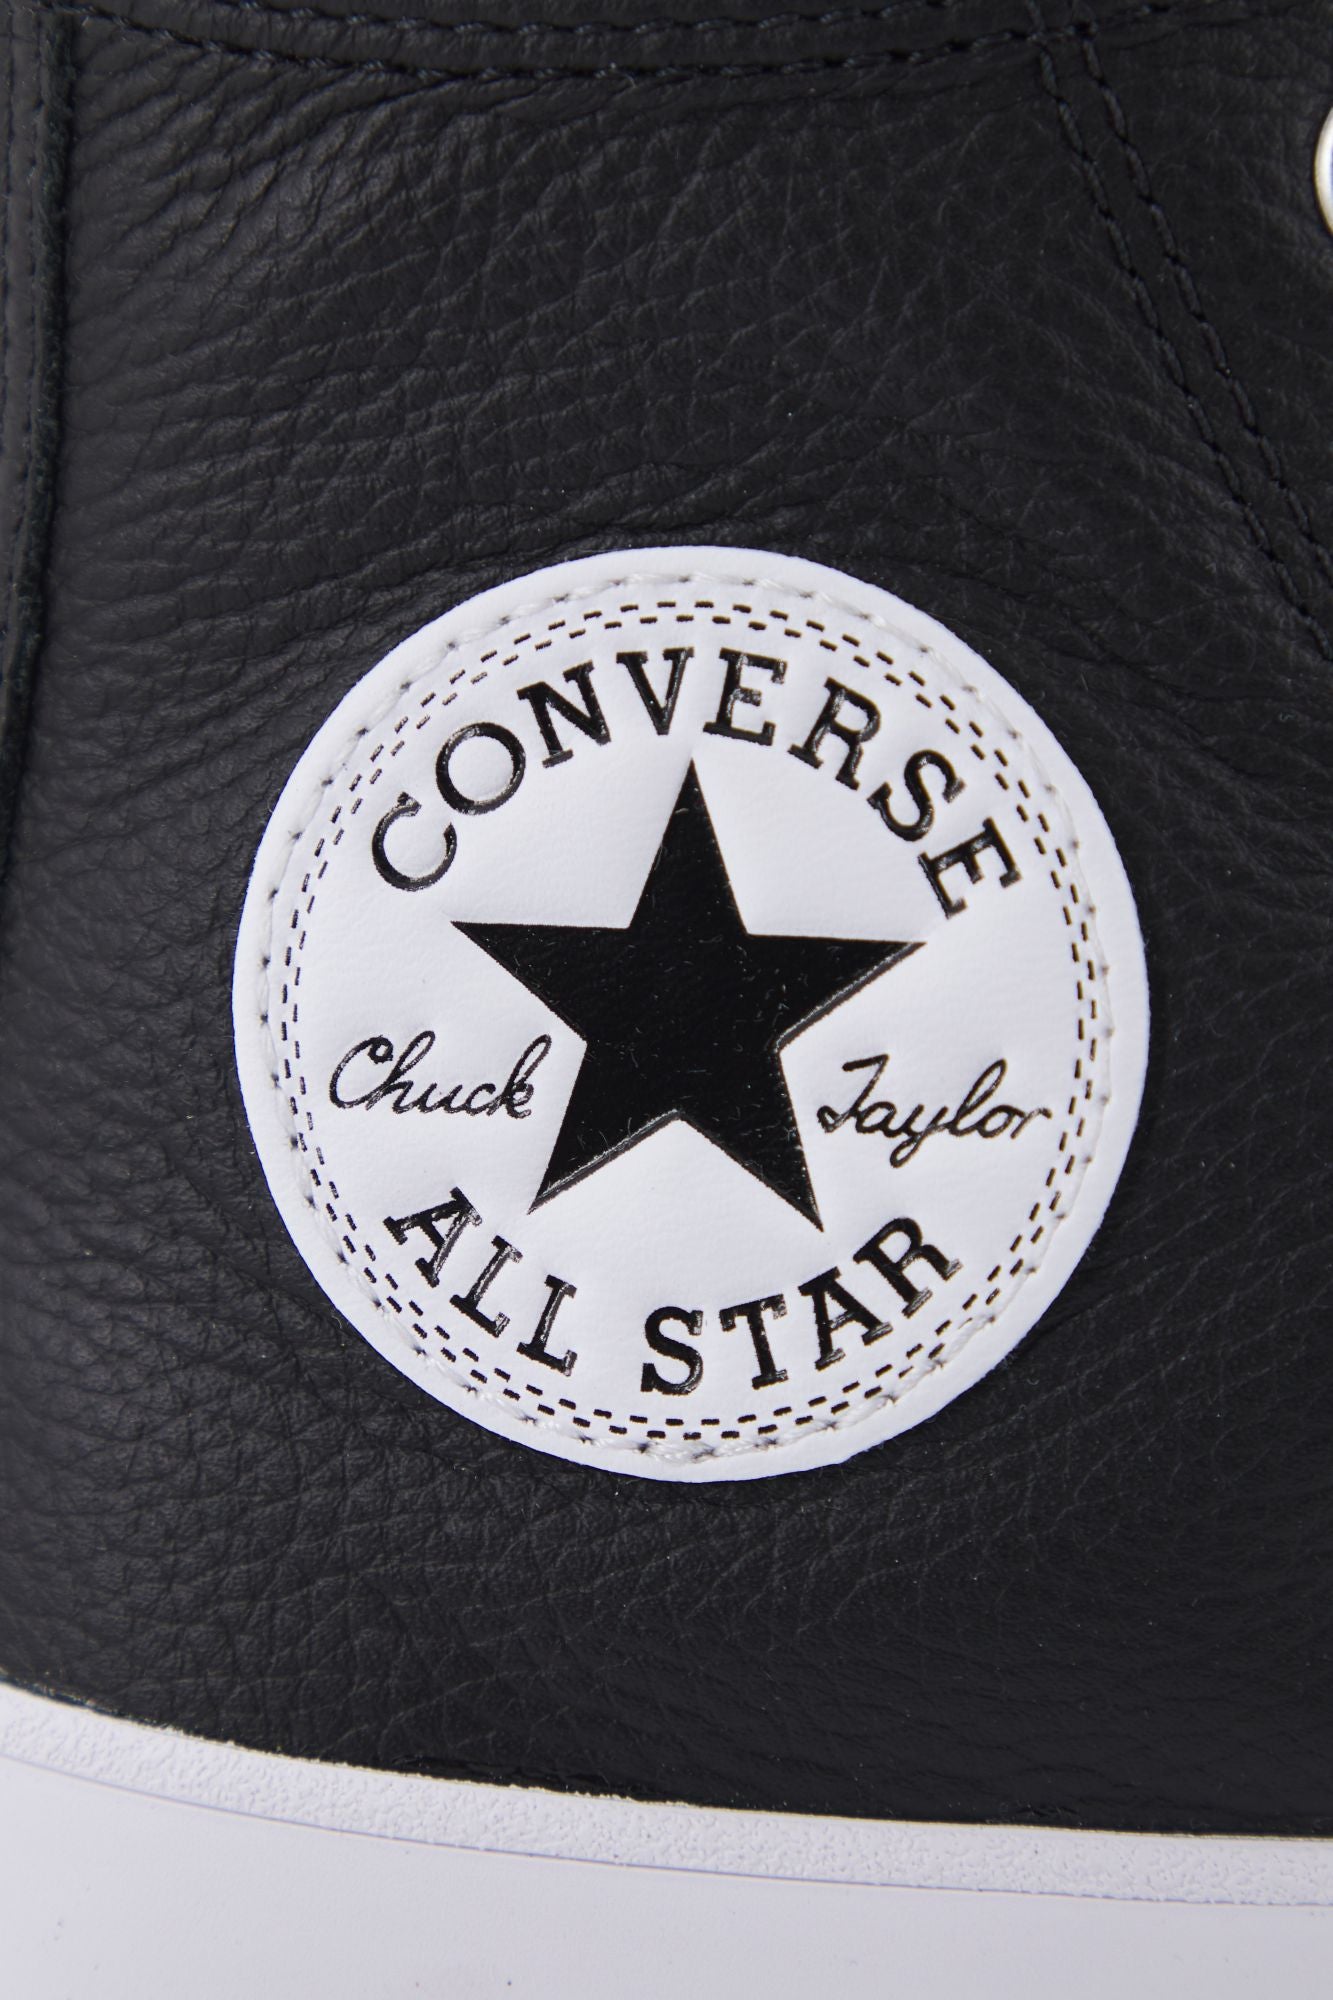 CONVERSE CHUCK TAYLOR ALL STAR LUGGED 2.0 LEATHER en color NEGRO (4)